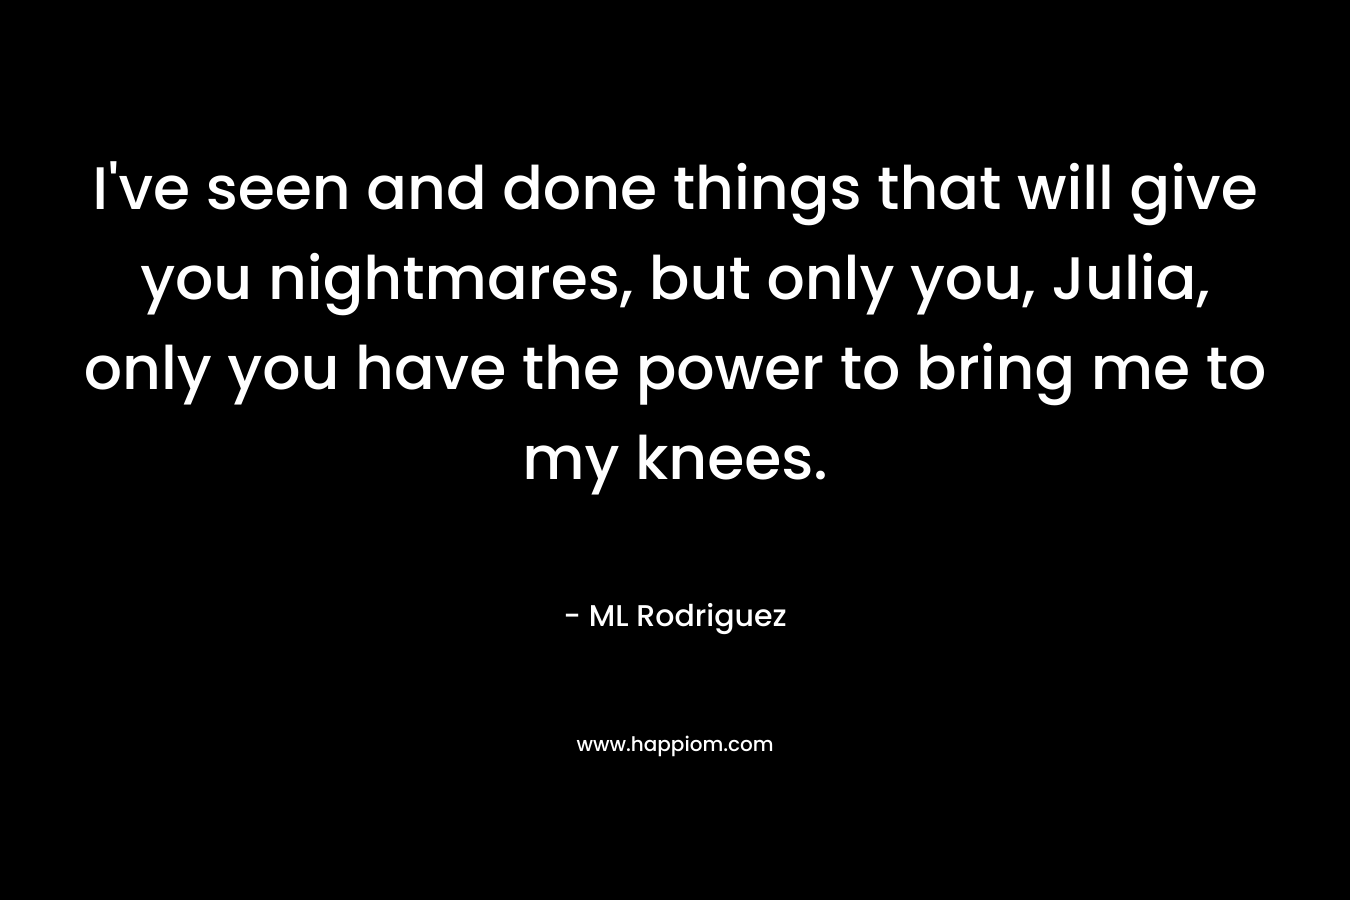 I’ve seen and done things that will give you nightmares, but only you, Julia, only you have the power to bring me to my knees. – ML Rodriguez